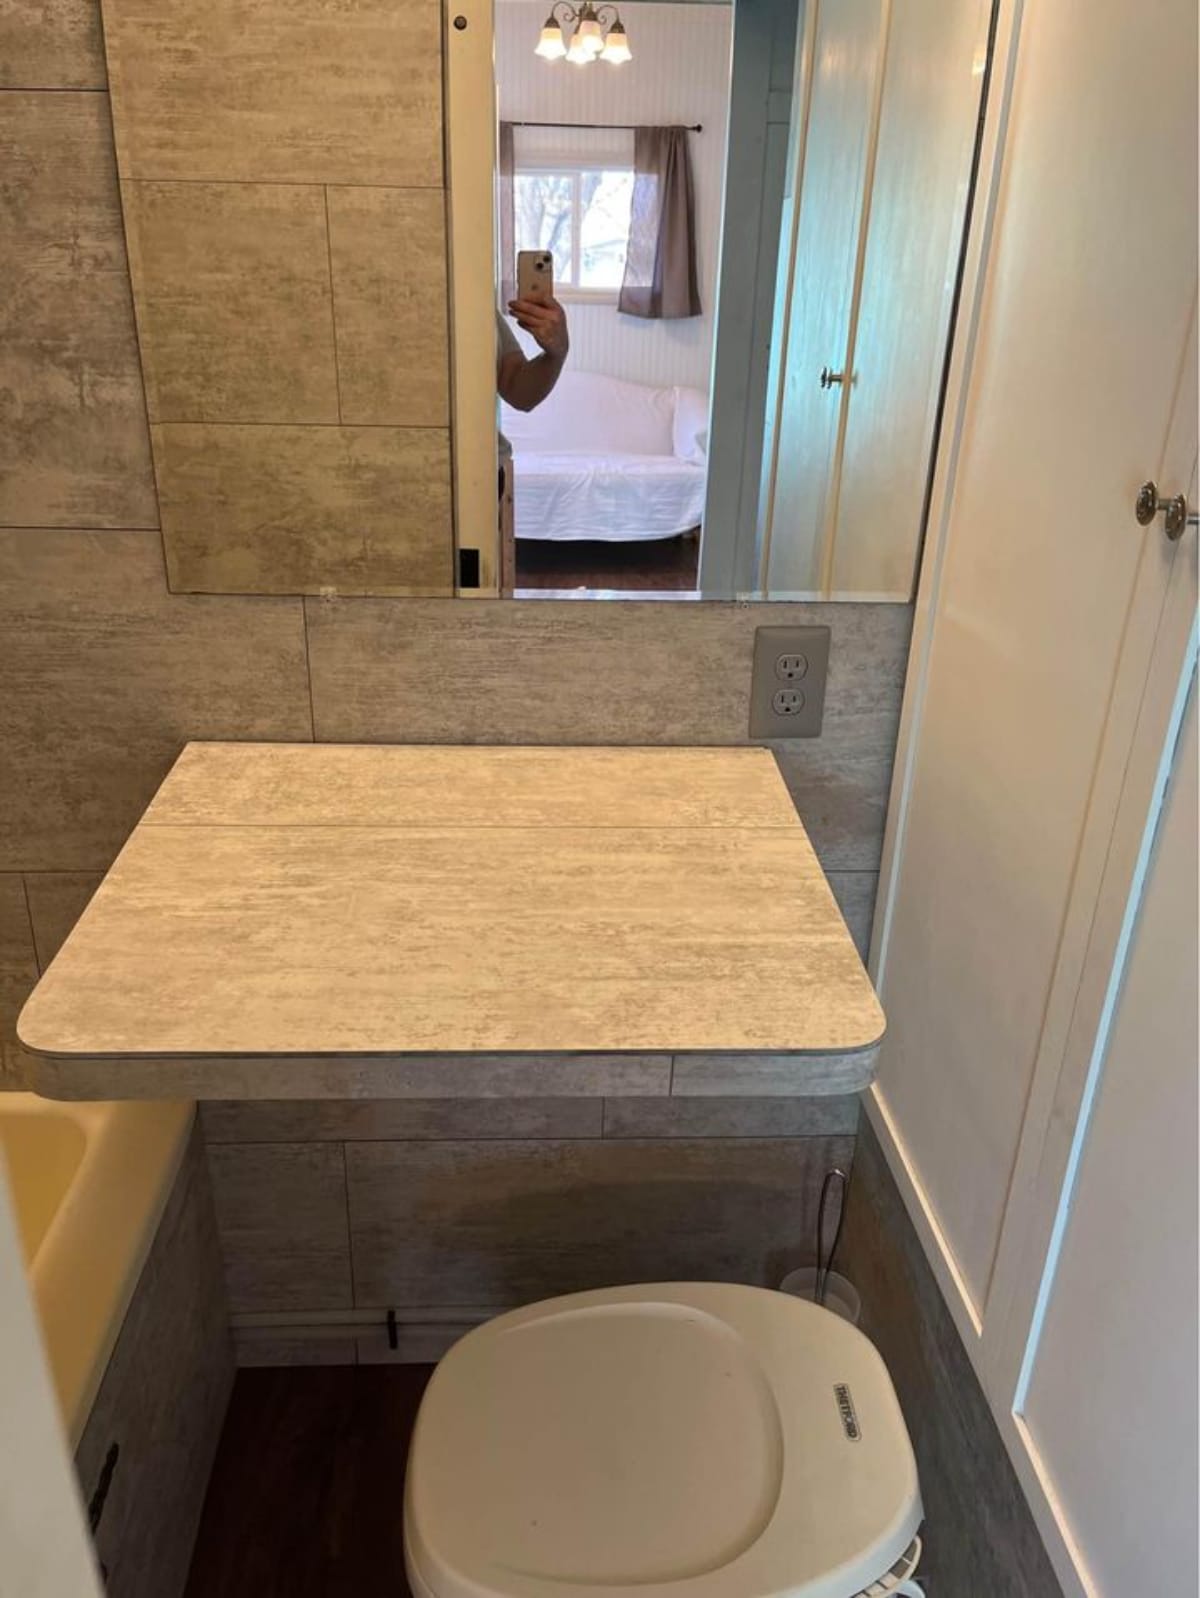 Bathroom has a huge mirror and foldable table